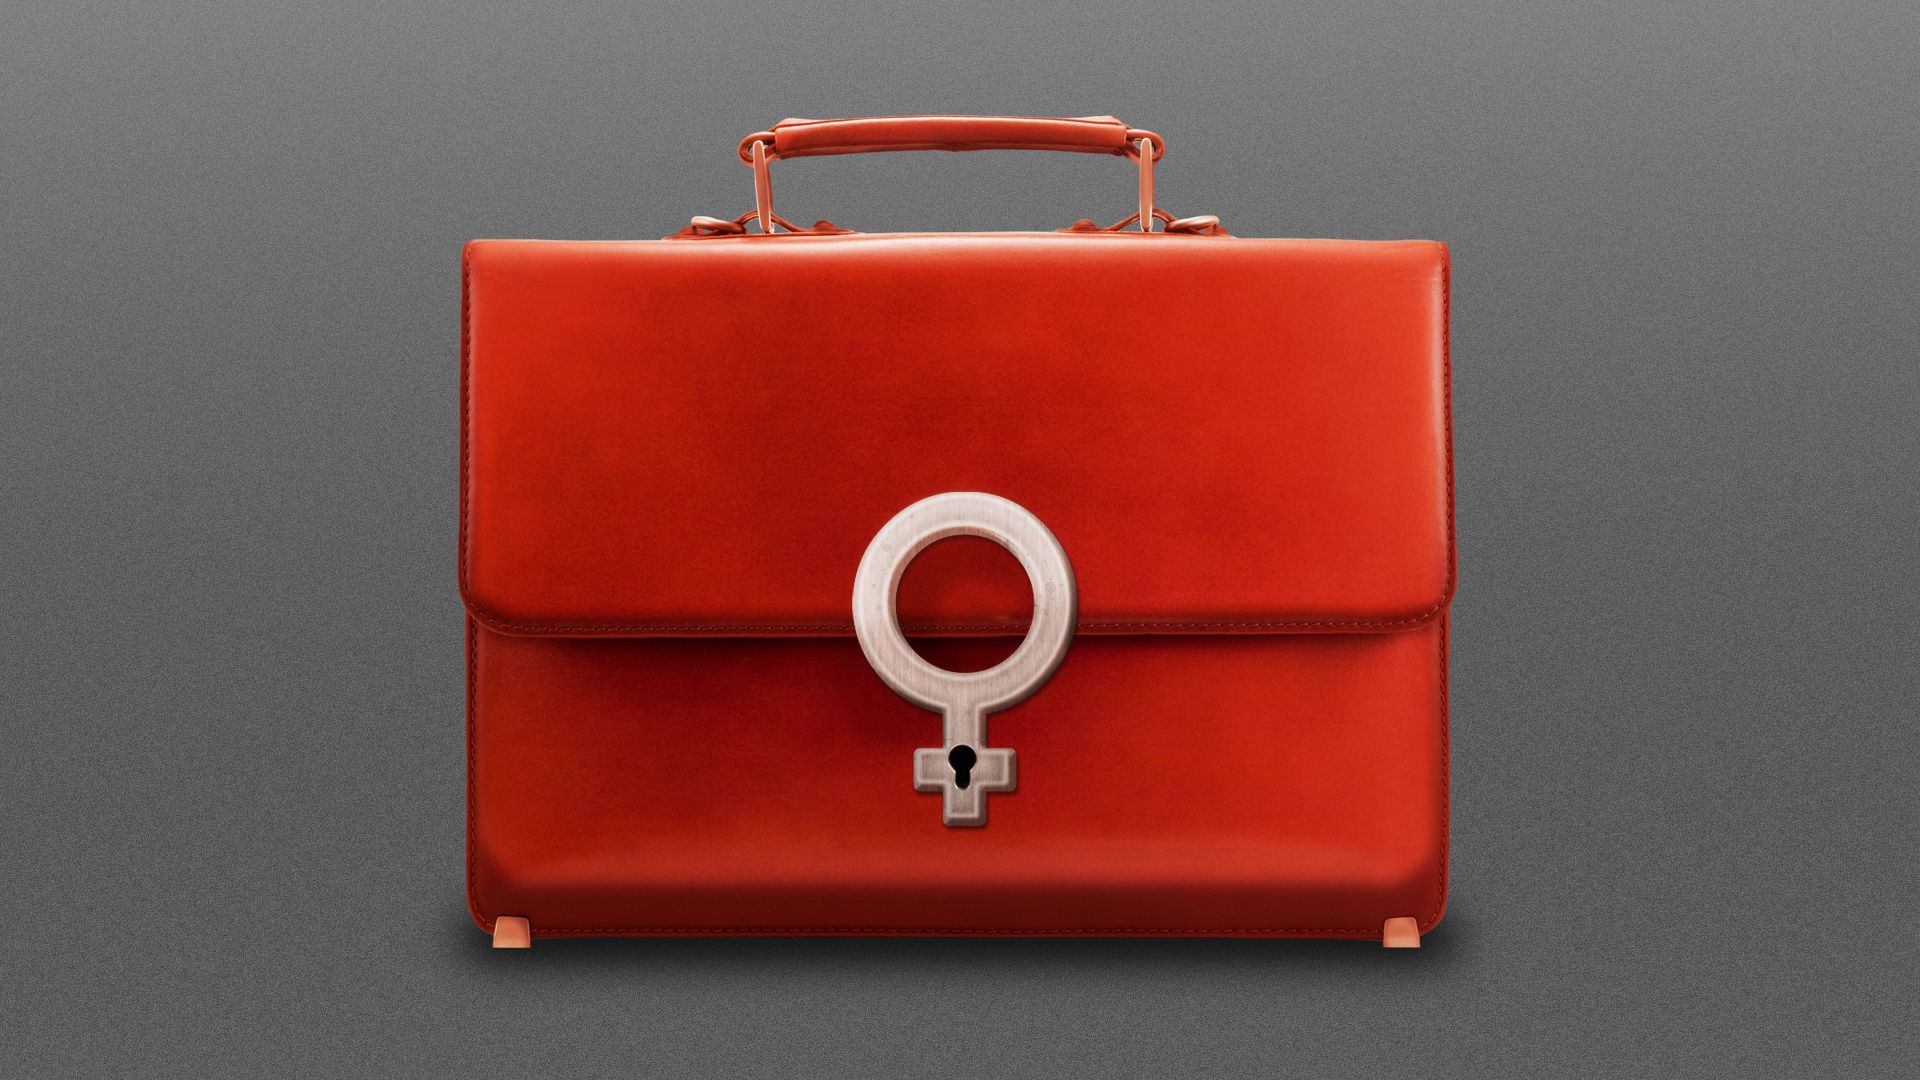 Illustration of a briefcase with the lock in the shape of the female symbol